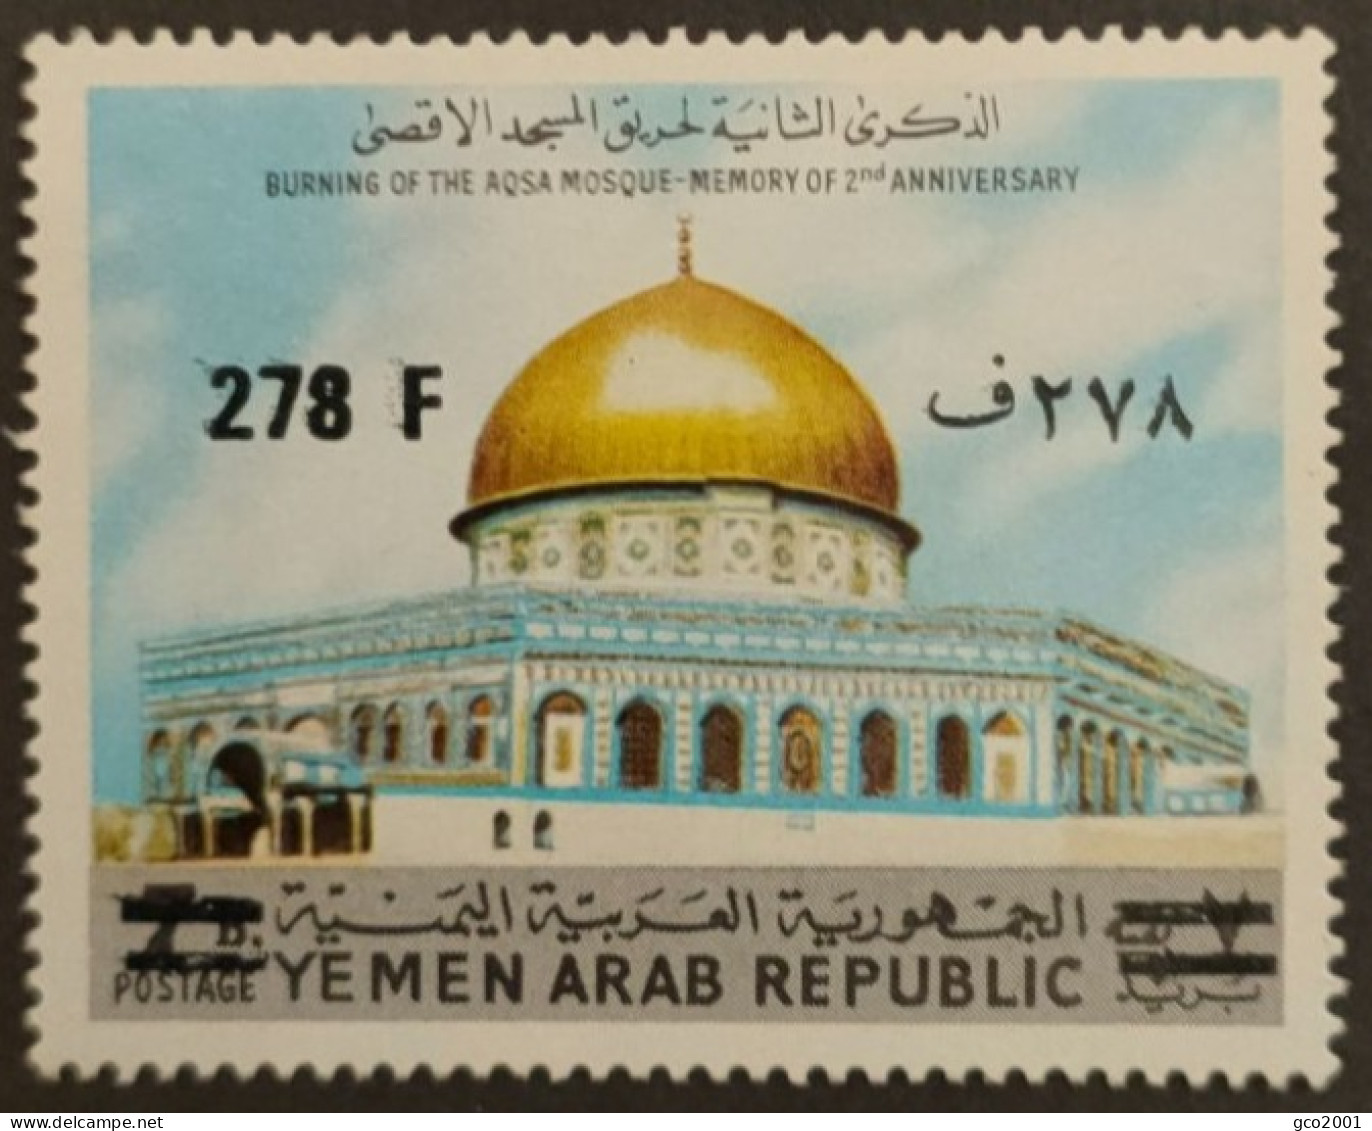 YEMEN / YT 284 / MOSQUEE AL AQSA - RELIGION / NEUF ** / MNH - Mosquées & Synagogues